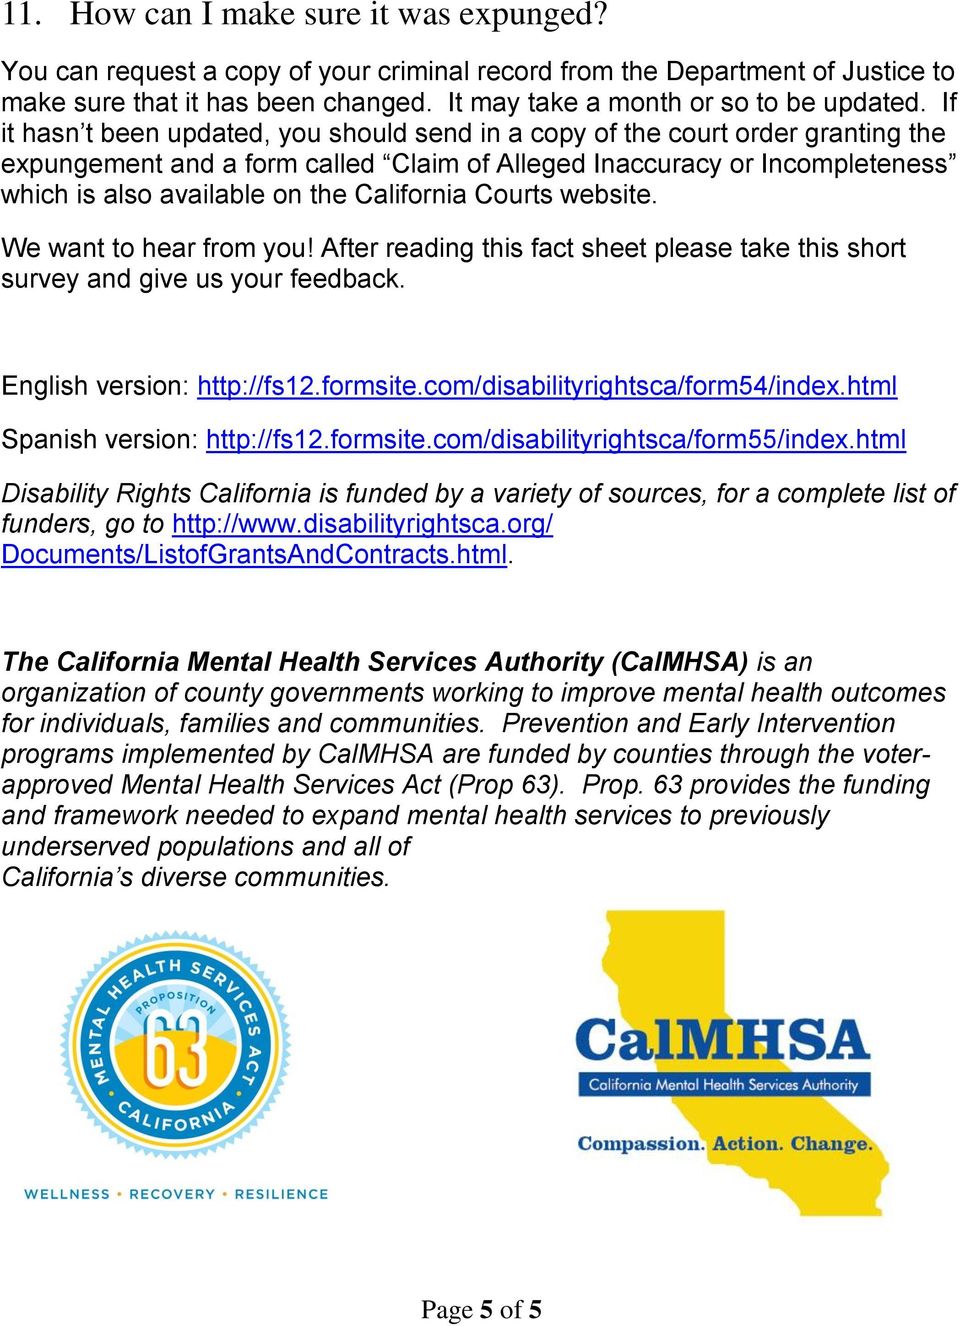 California Courts website. We want to hear from you! After reading this fact sheet please take this short survey and give us your feedback. English version: http://fs12.formsite.